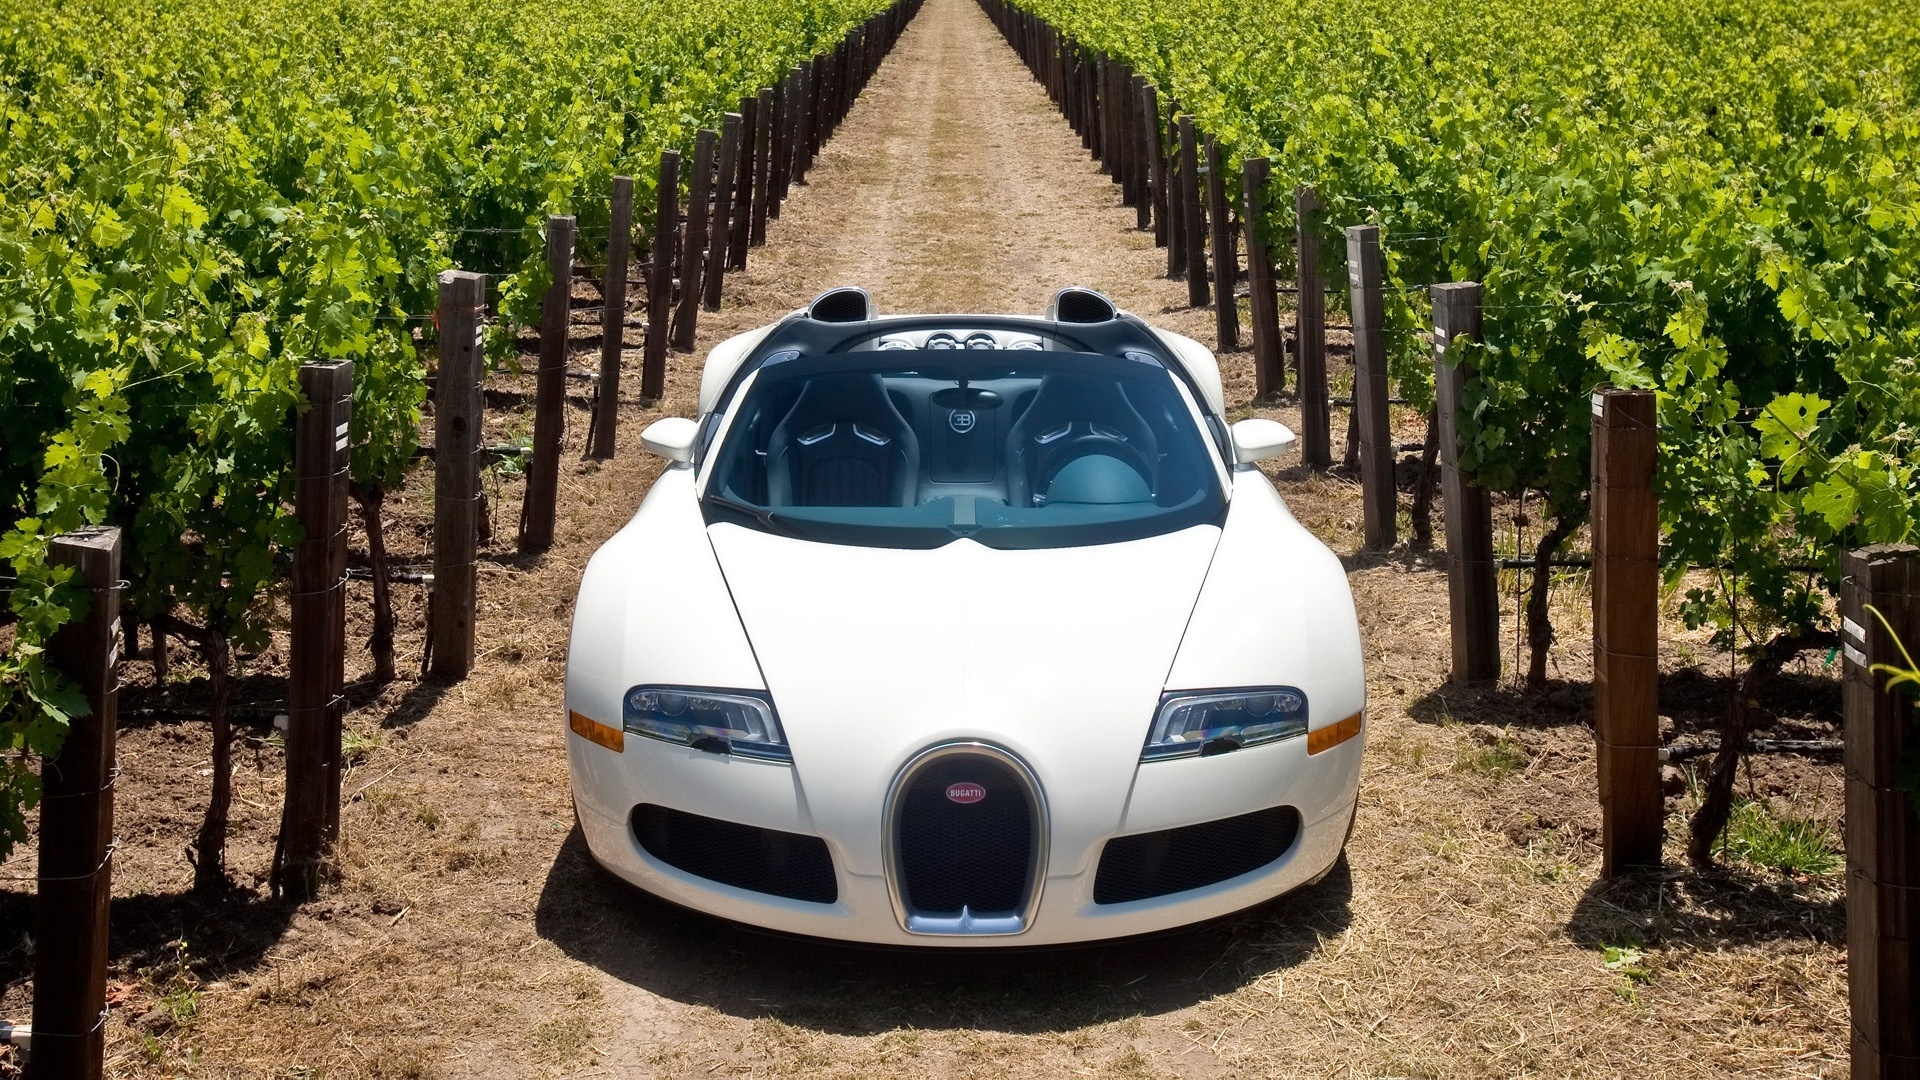 Bugatti Veyron 16.4 Grand Sport 2010 in Napa Valley - Front 2 for 1920 x 1080 HDTV 1080p resolution